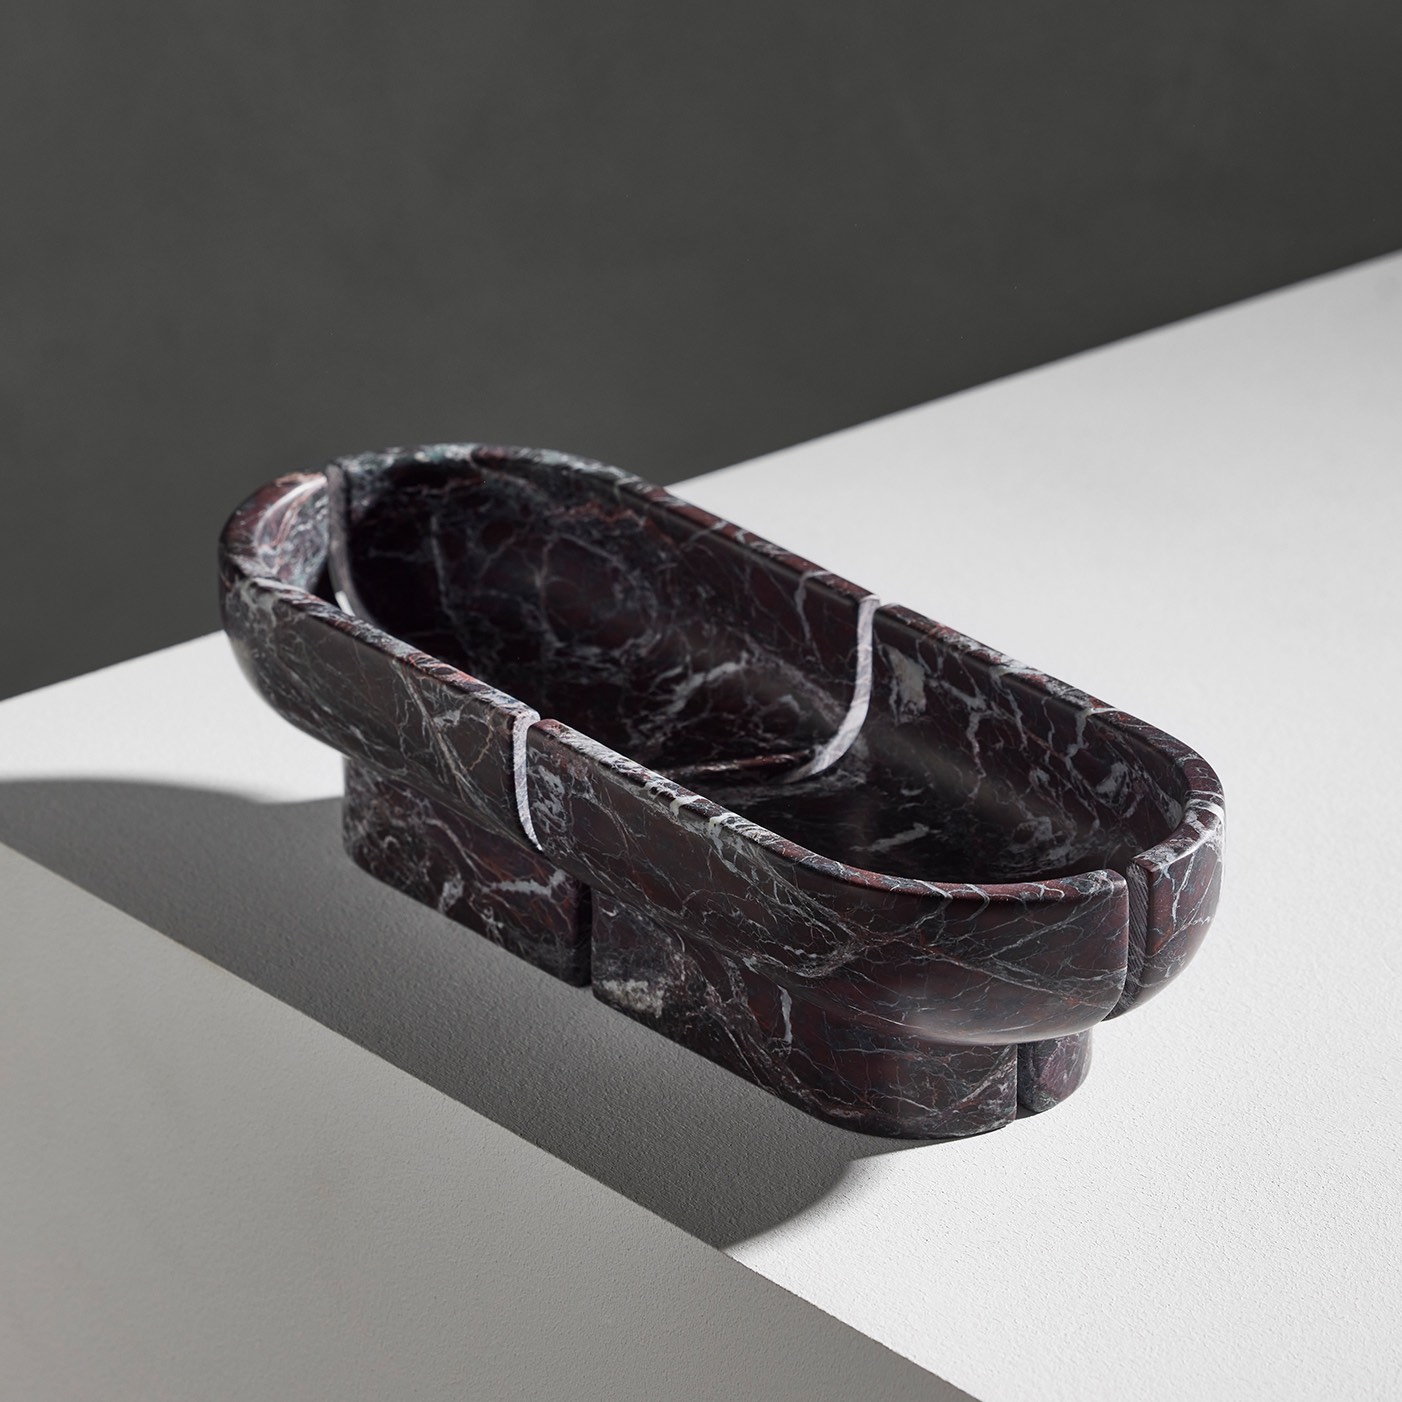 NOTCH-BOWL-ROSSO-LEVANTO-POPULUS-PROJECT_COLLECTION_PARTICULIERE-CREDIT_PHOTO-F_AMIAND